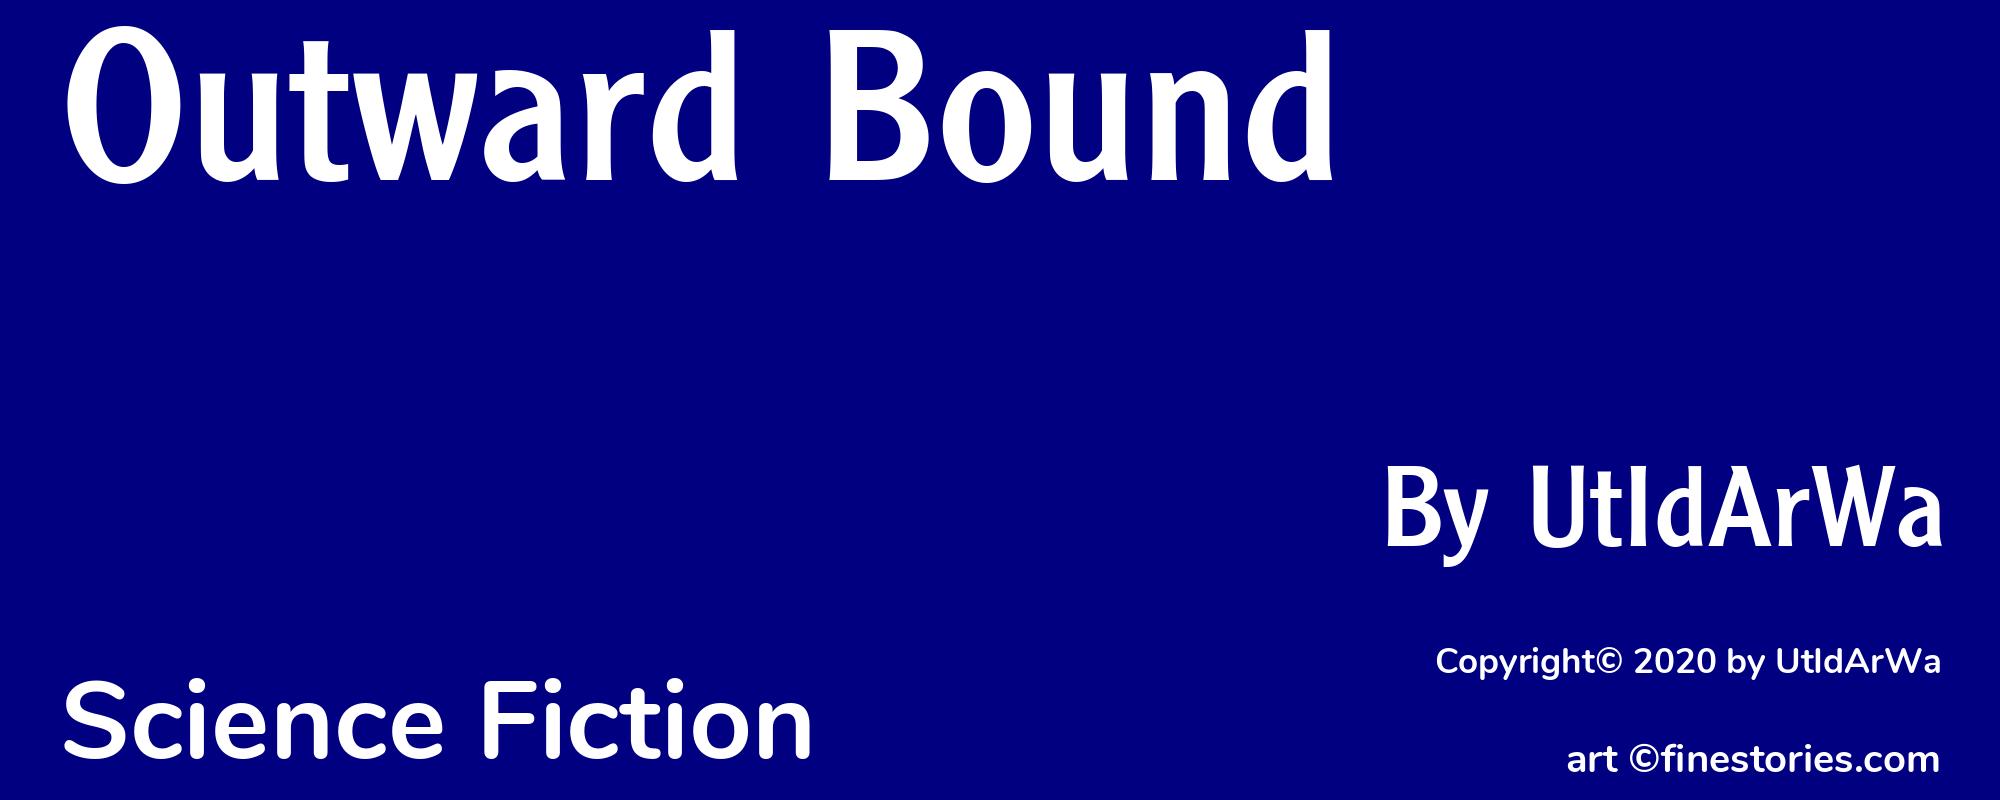 Outward Bound - Cover